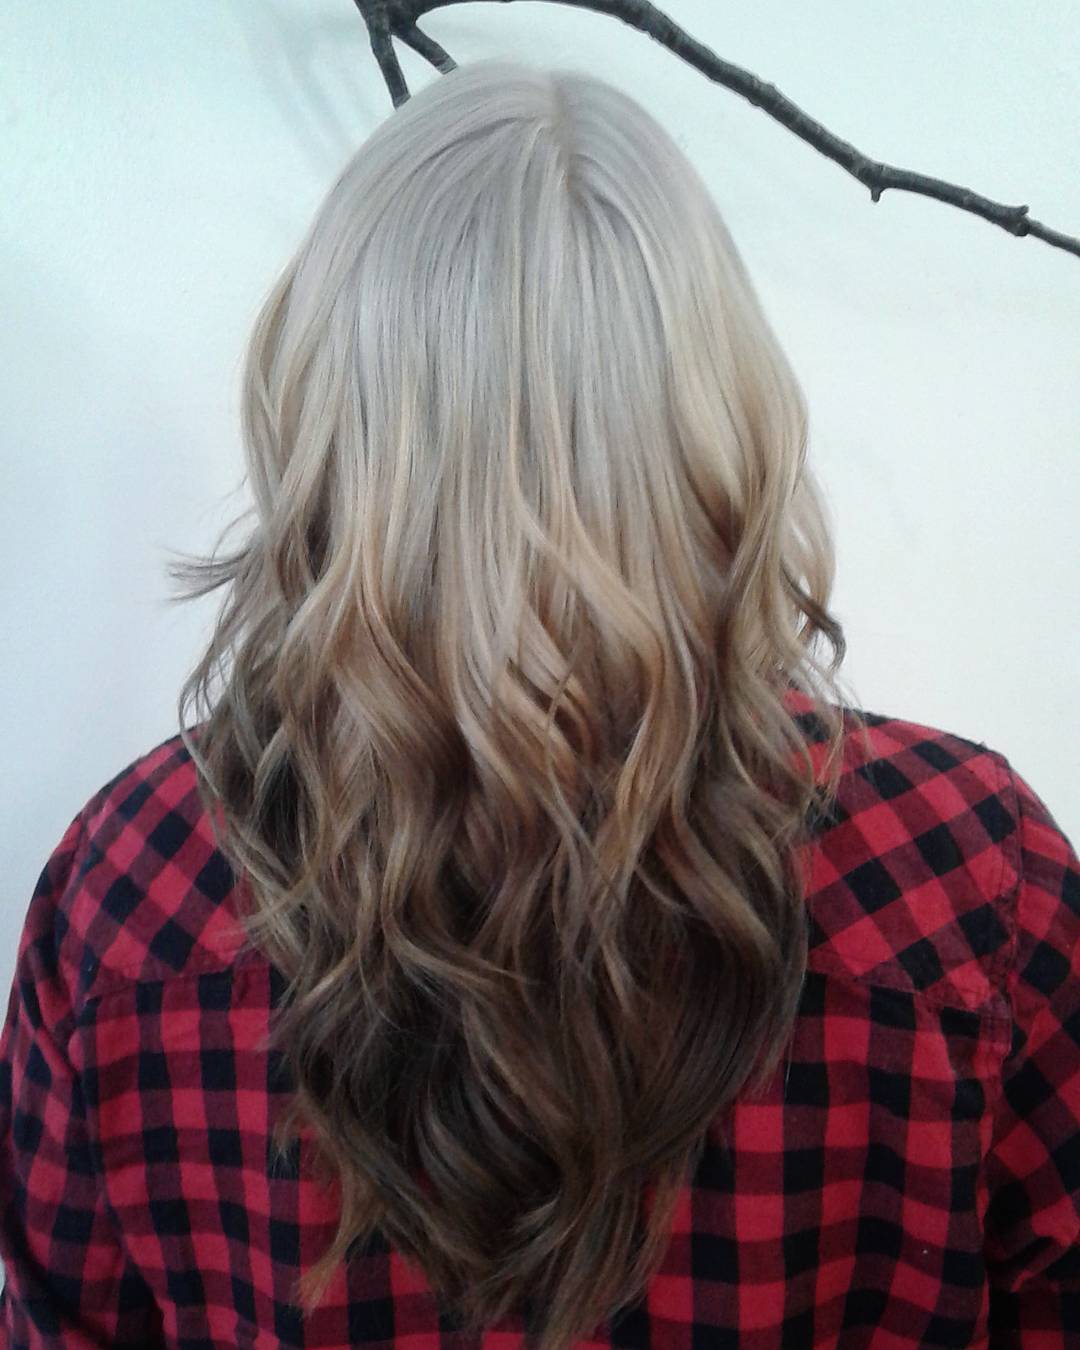 Reverse ombre hairstyles, as well as classical variation of ombre, are good...